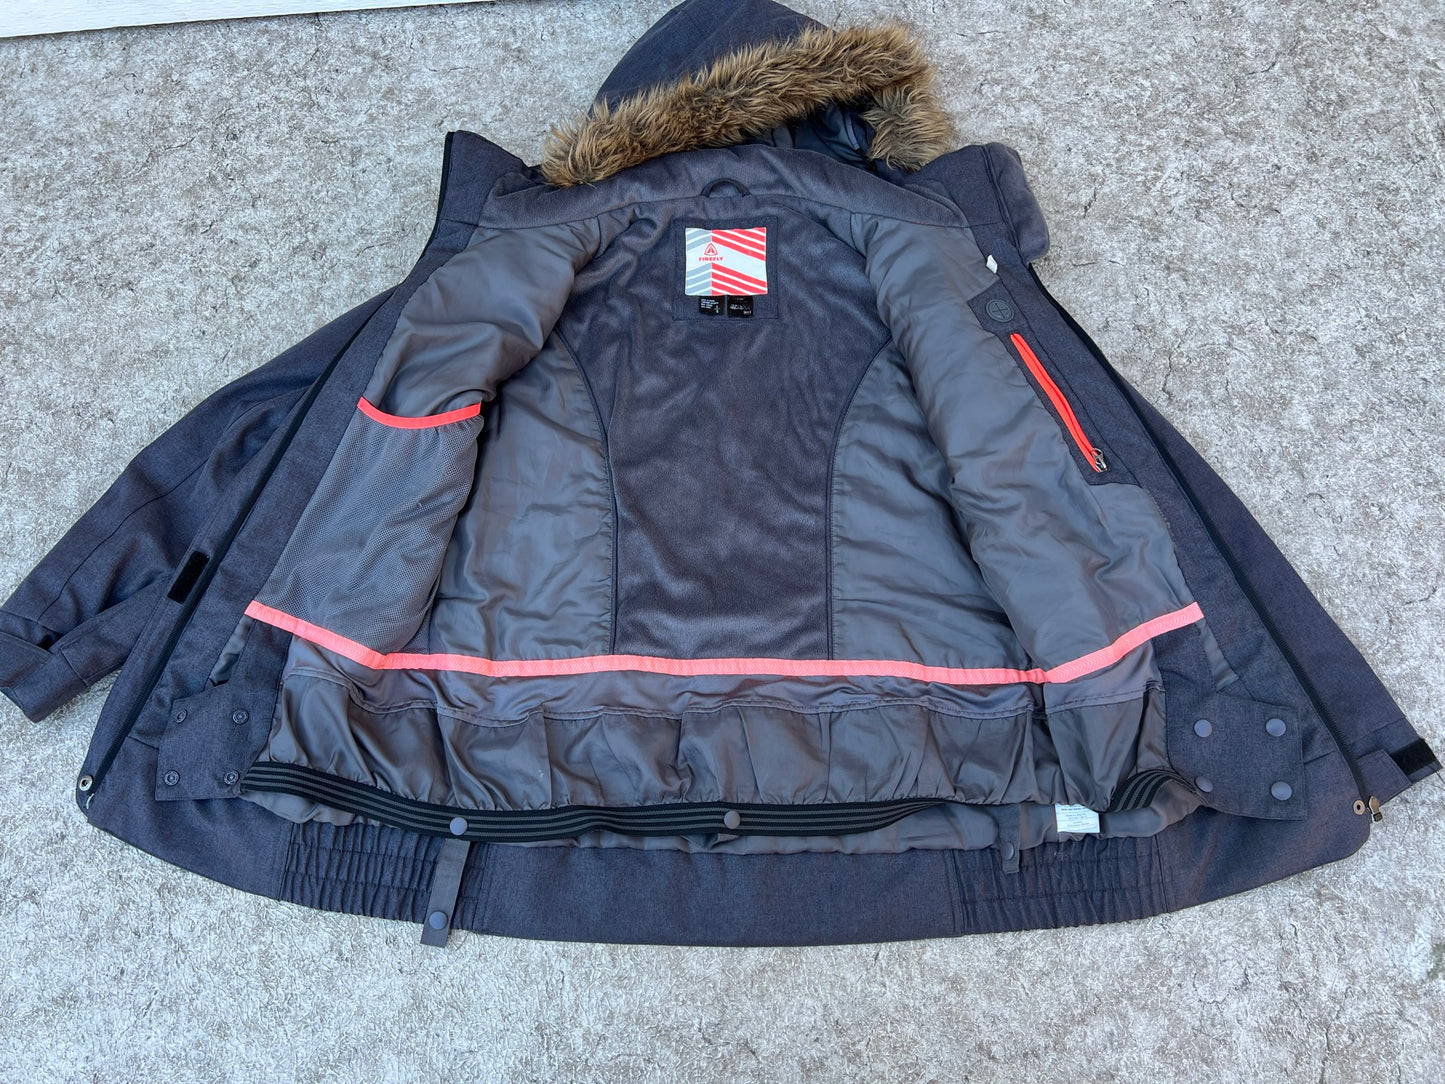 Winter Coat Ladies Size Large Firefly Snowboarding With Snow Belt Faux Fur Grey  Excellent